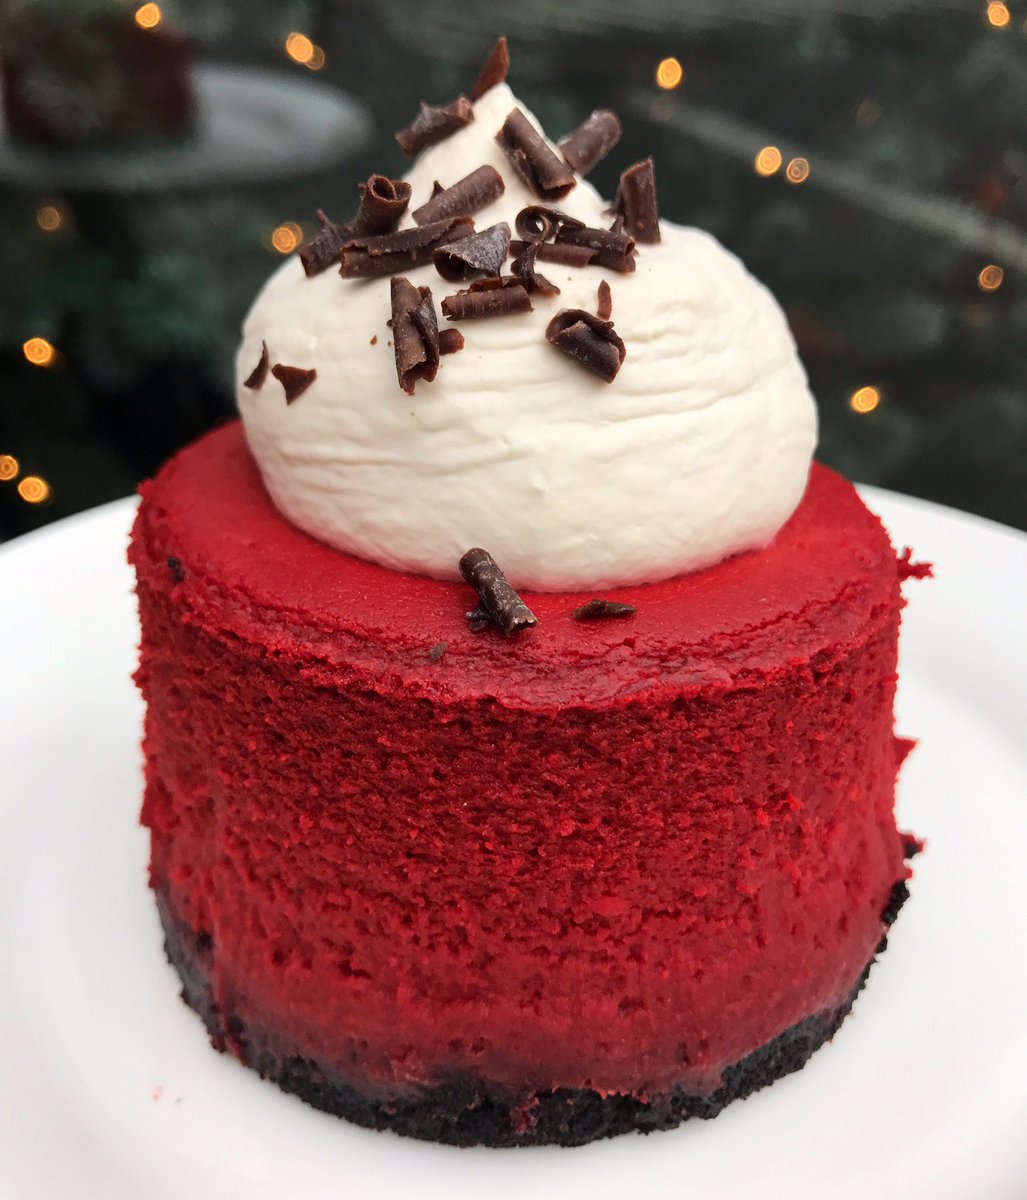 Andesbjergene kilometer baggrund Magnolia Bakery on Twitter: "♥️Red velvet cheesecake is the right kind of  holiday cheer. Tag a friend who loves red velvet! 🎄#magnoliabakery  https://t.co/y5EXQiaNf0" / Twitter